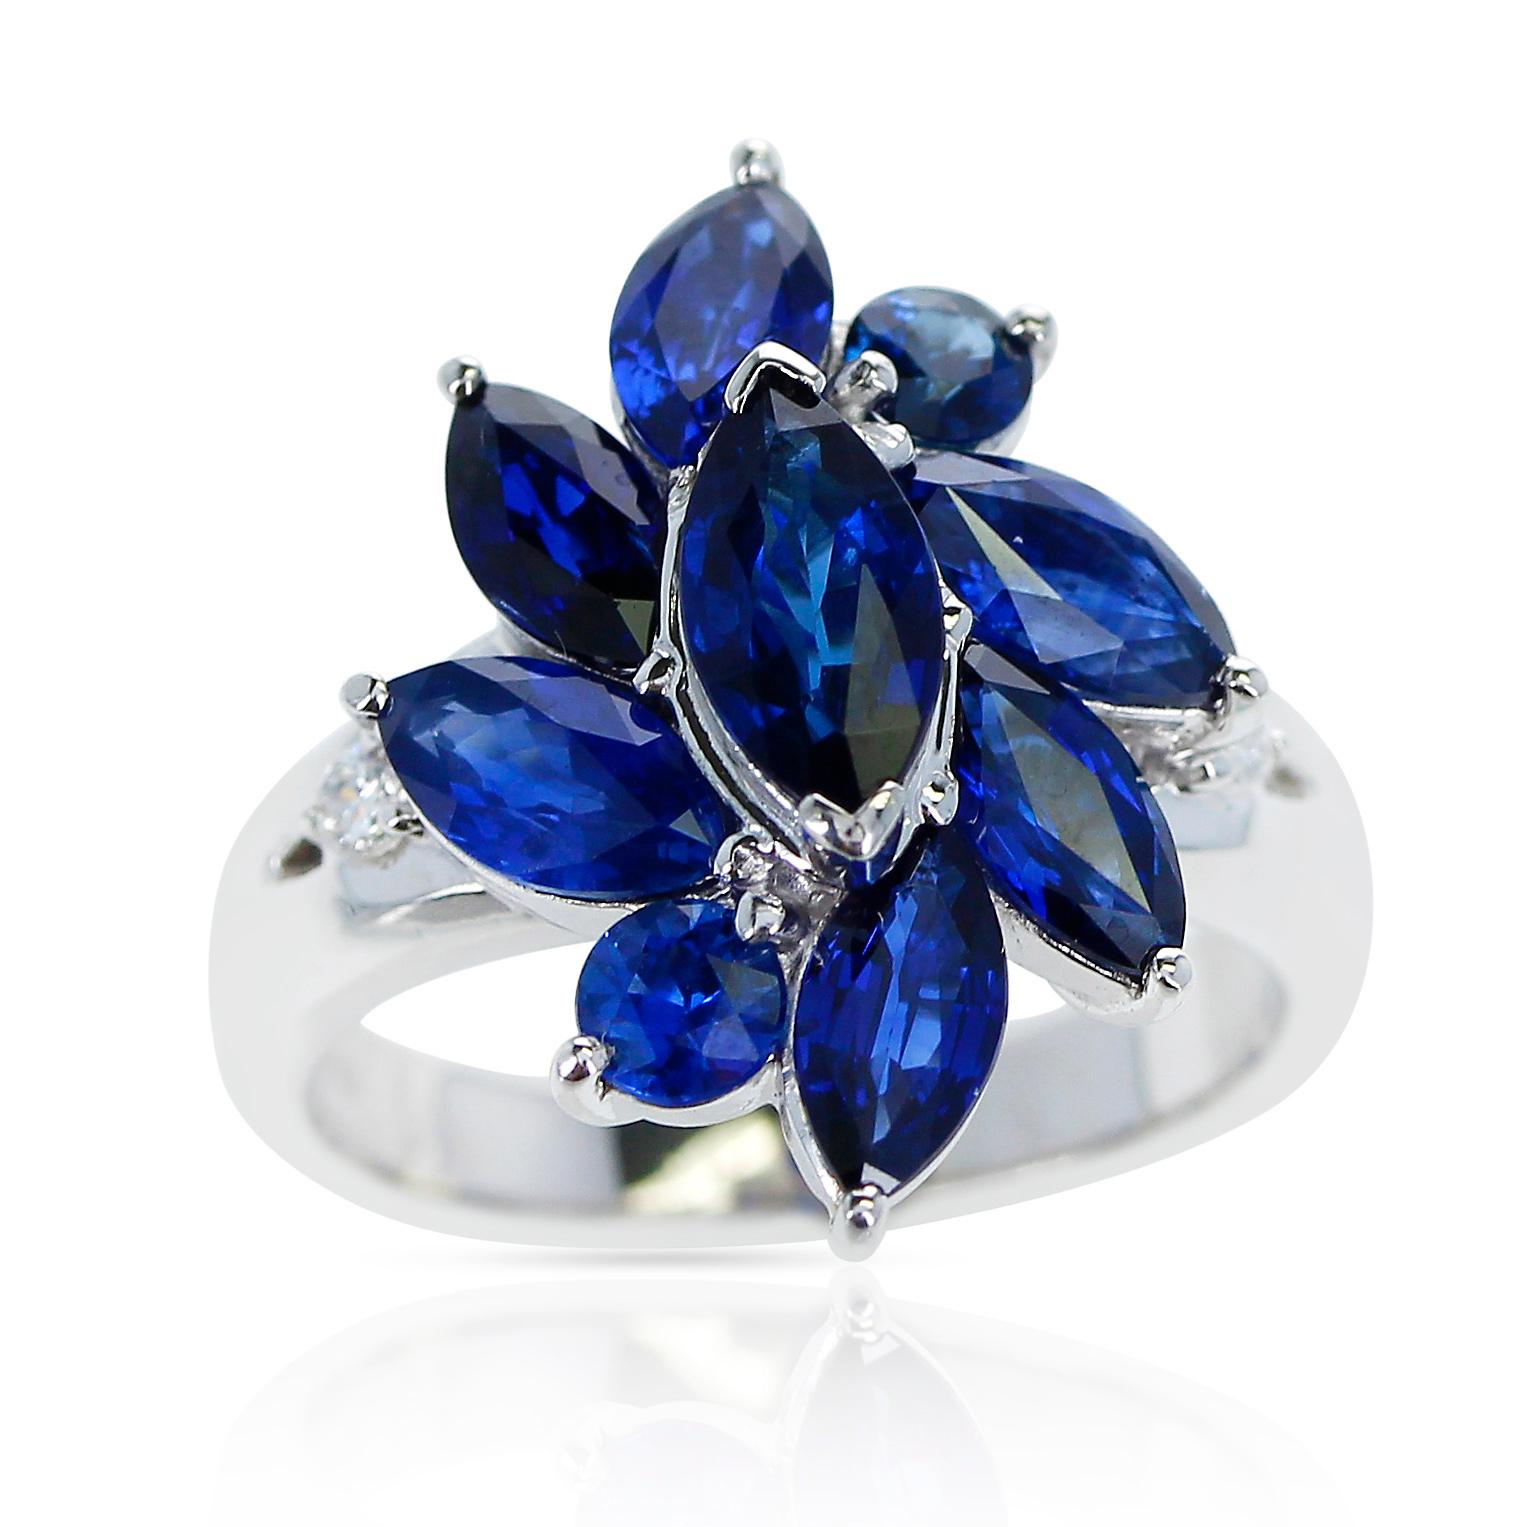 A Flower Shape Ring with Marquise 3.88 carat Blue Sapphires and 0.06 Round Diamonds Ring made in Platinum. Ring Size US 5.75. Total Weight: 9.58 grams. 